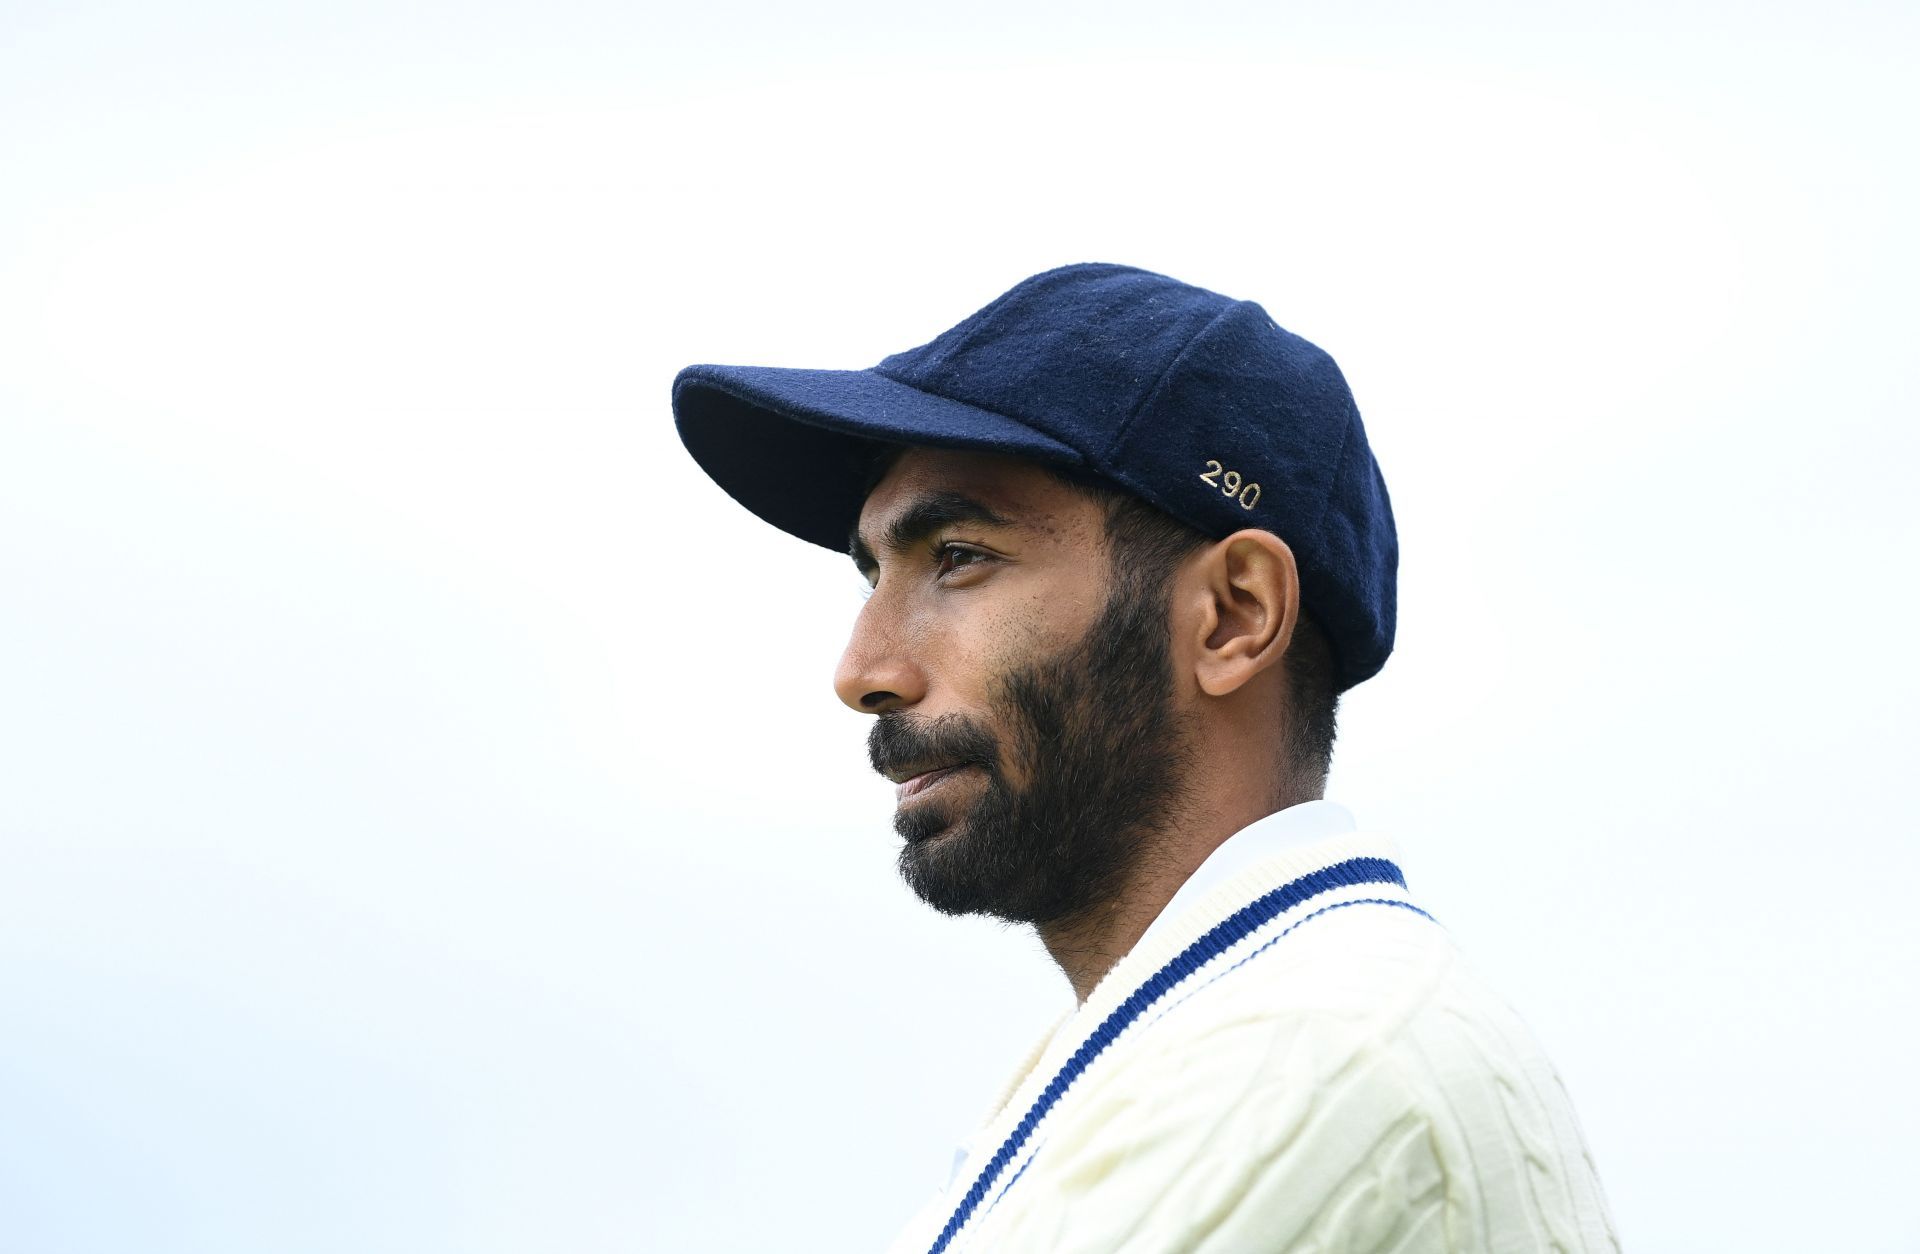 Jasprit Bumrah was at his best in the first Test